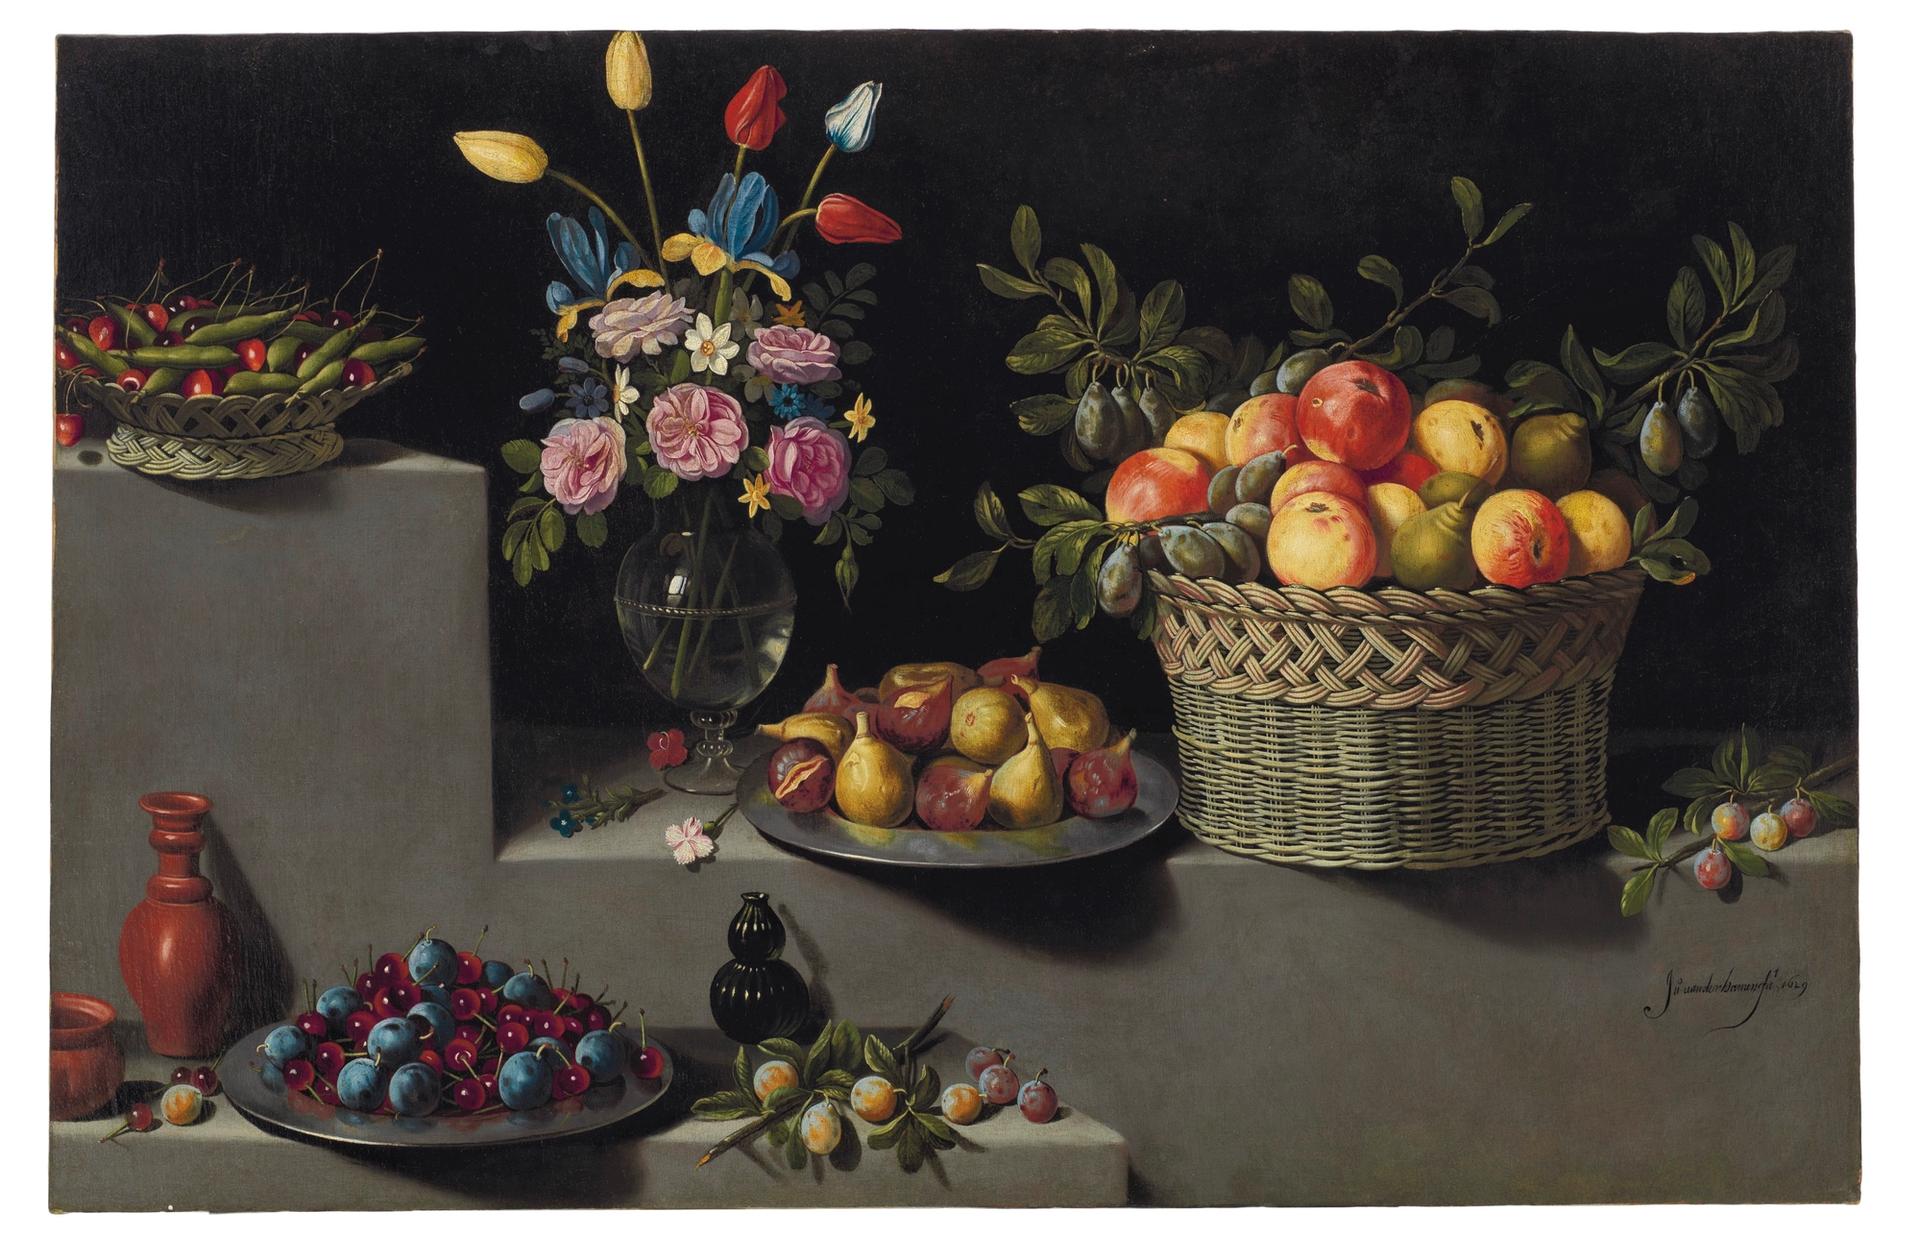 Juan van der Hamen y León's Still life with flowers and fruit was on long-term loan to the Met and is now offered at Christie's. Courtesy of Christie's Images Ltd